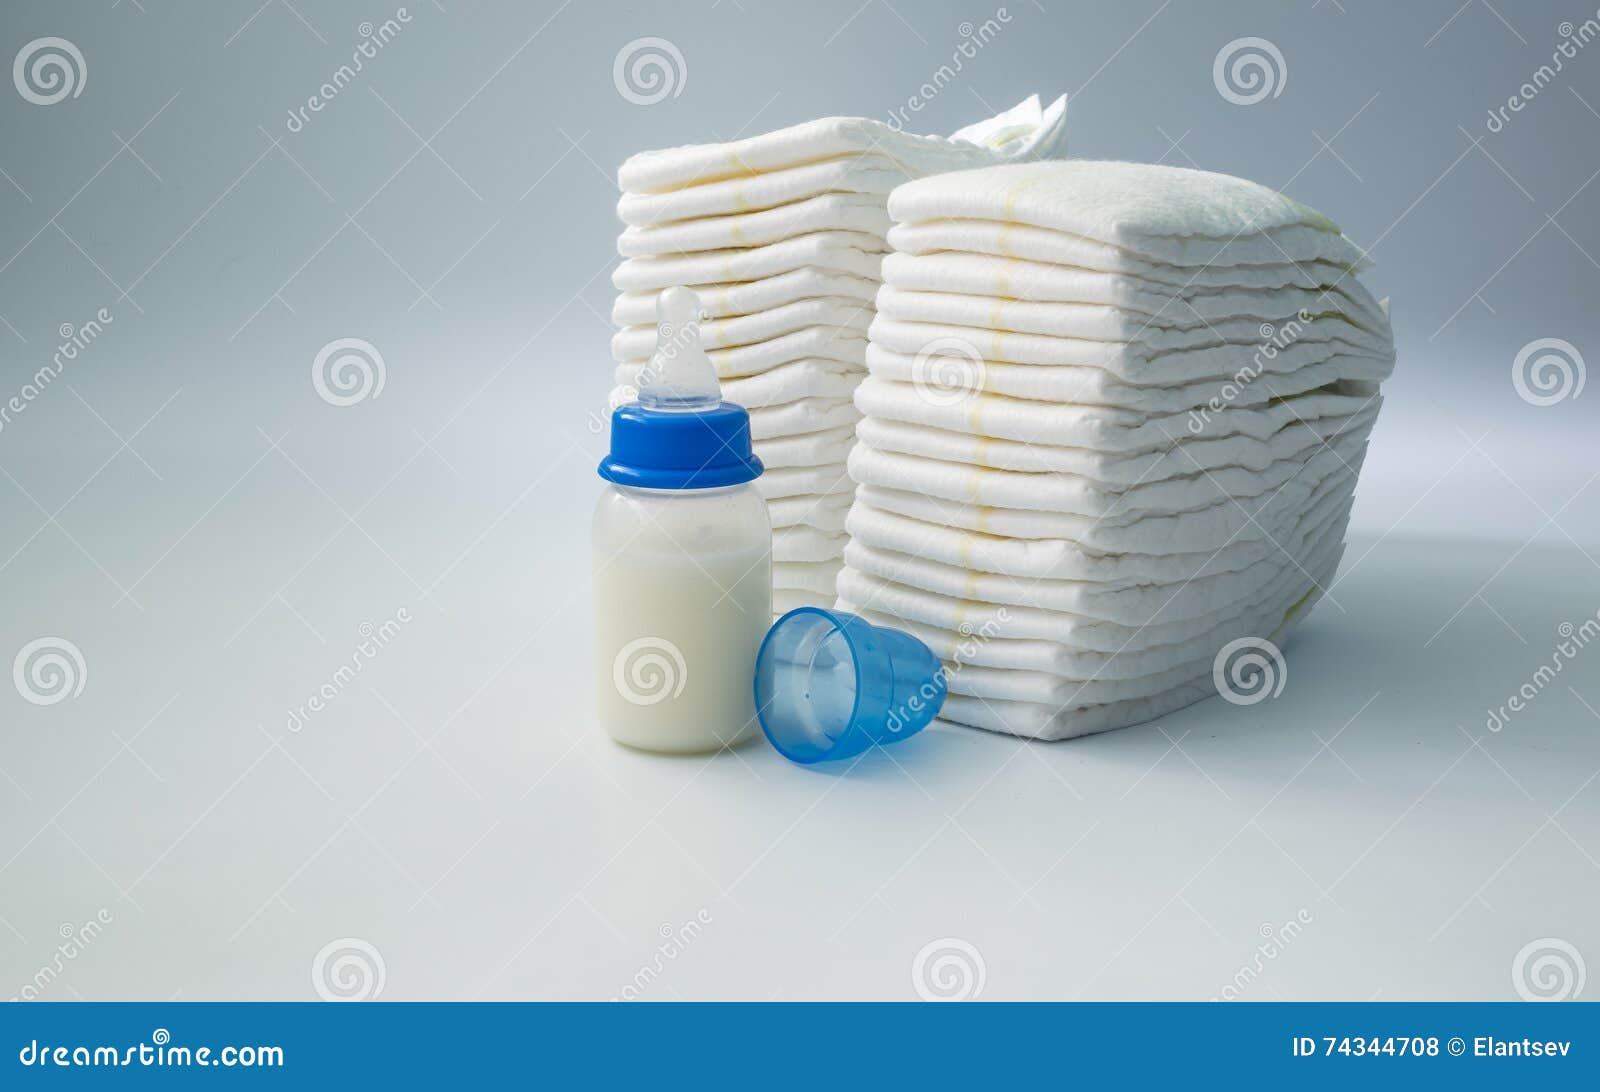 Pile Of Diapers And Baby Bottles On White Background Stock Photo ...